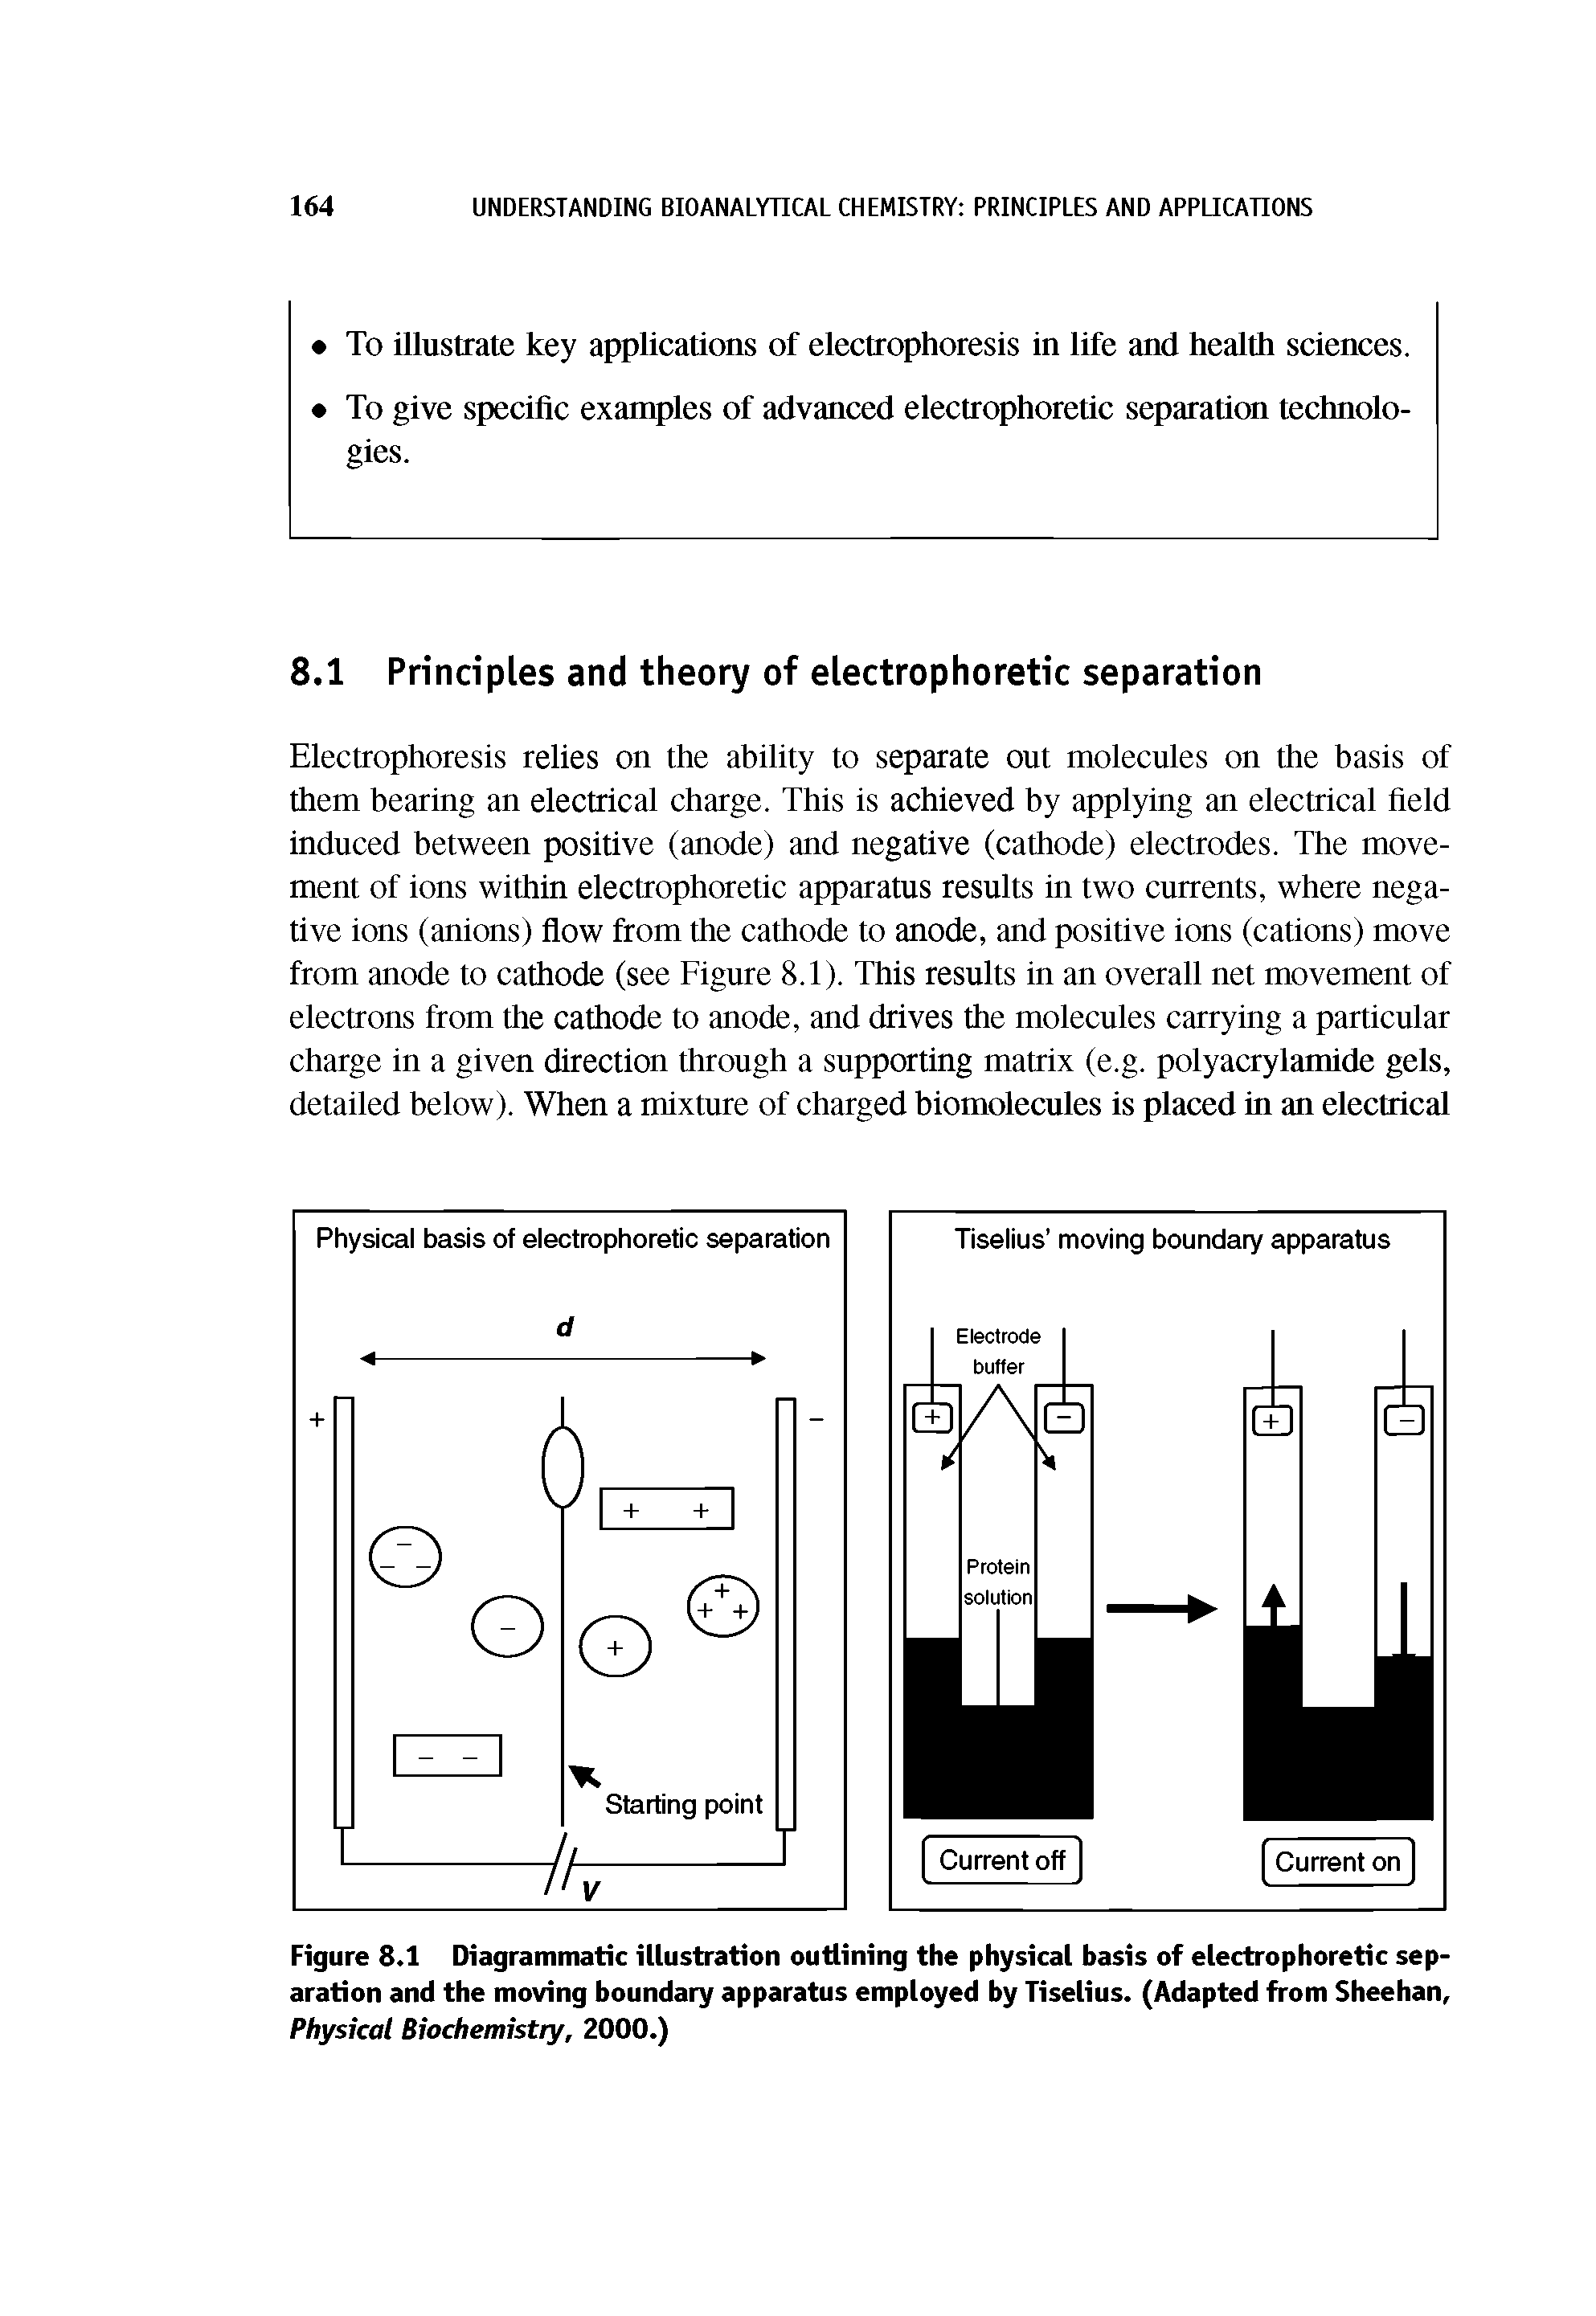 Figure 8.1 Diagrammatic illustration outlining the physical basis of electrophoretic separation and the moving boundary apparatus employed by Tiselius. (Adapted from Sheehan, Physical Biochemistry, 2000.)...